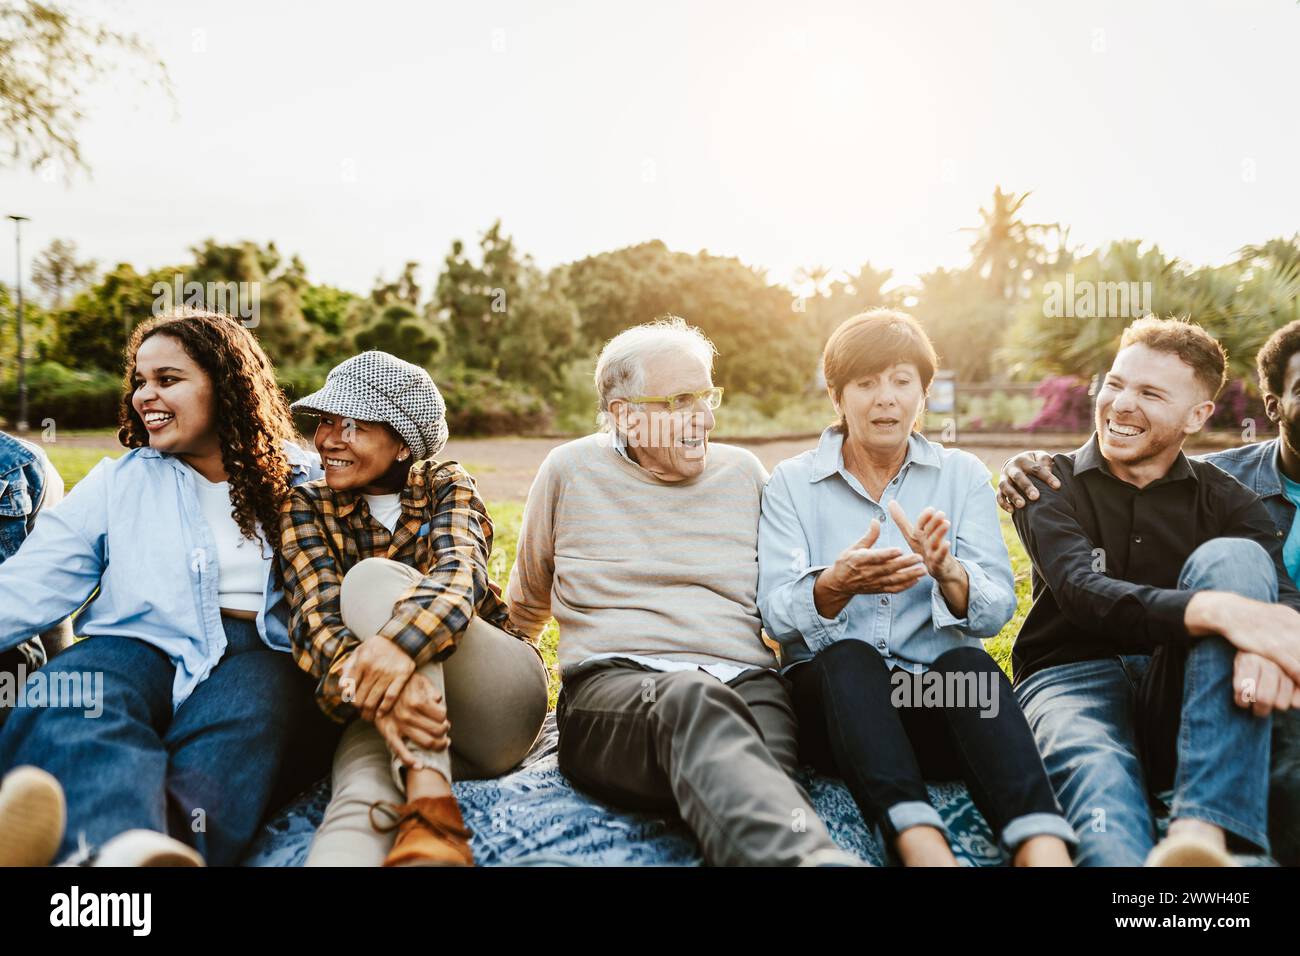 Happy multi generational people having fun sitting on grass in a public park - Diversity and friendship concept Stock Photo